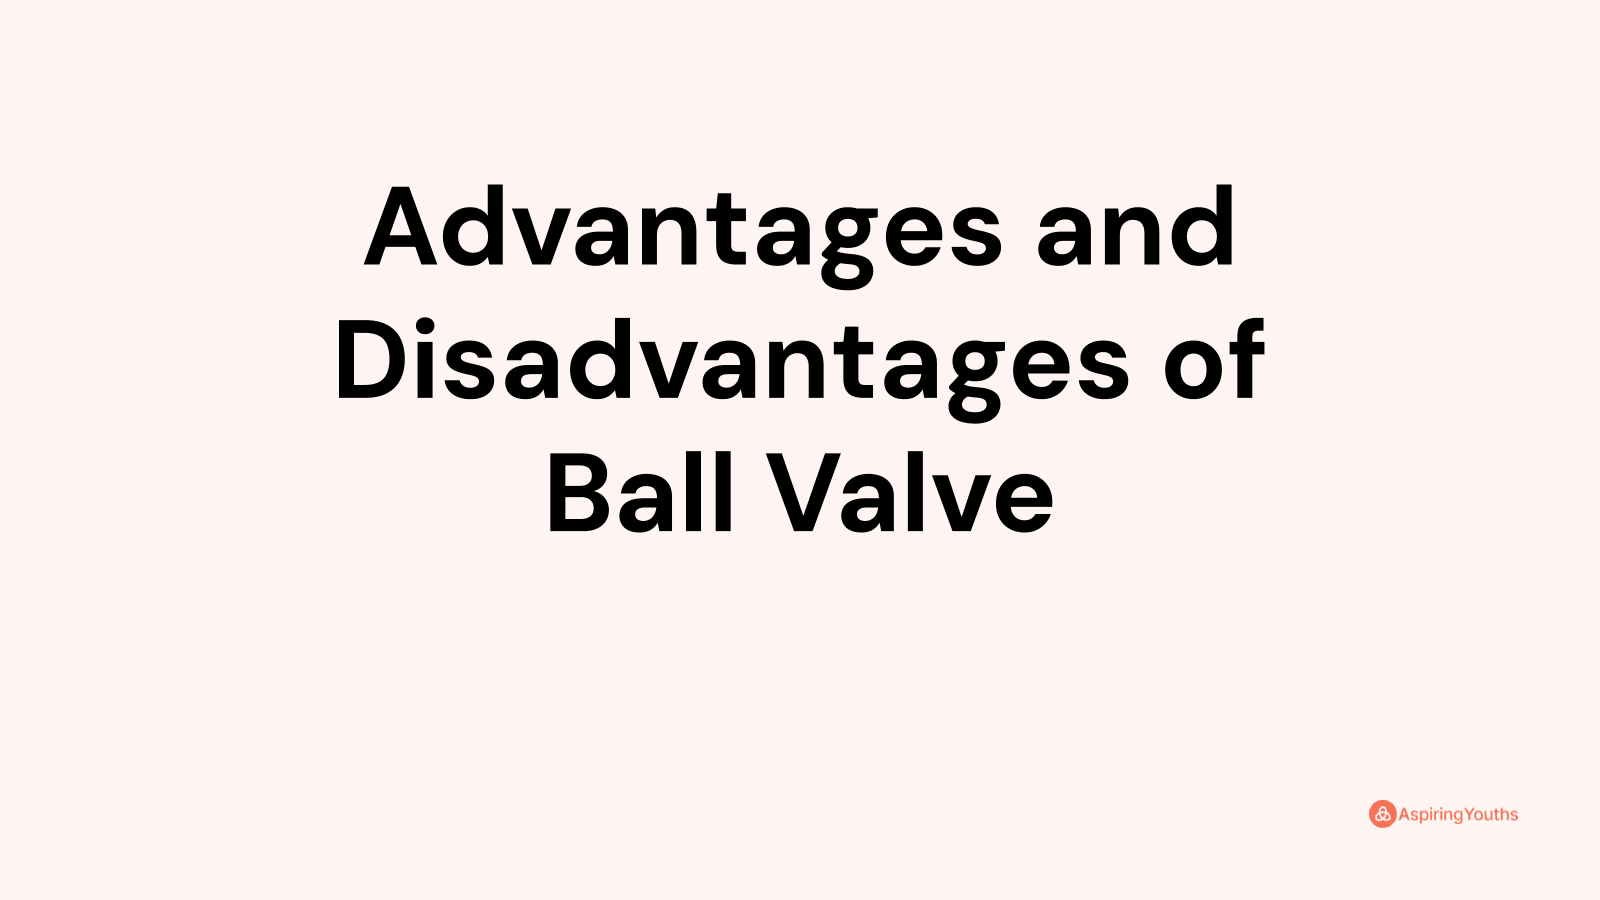 Advantages and disadvantages of Ball Valve